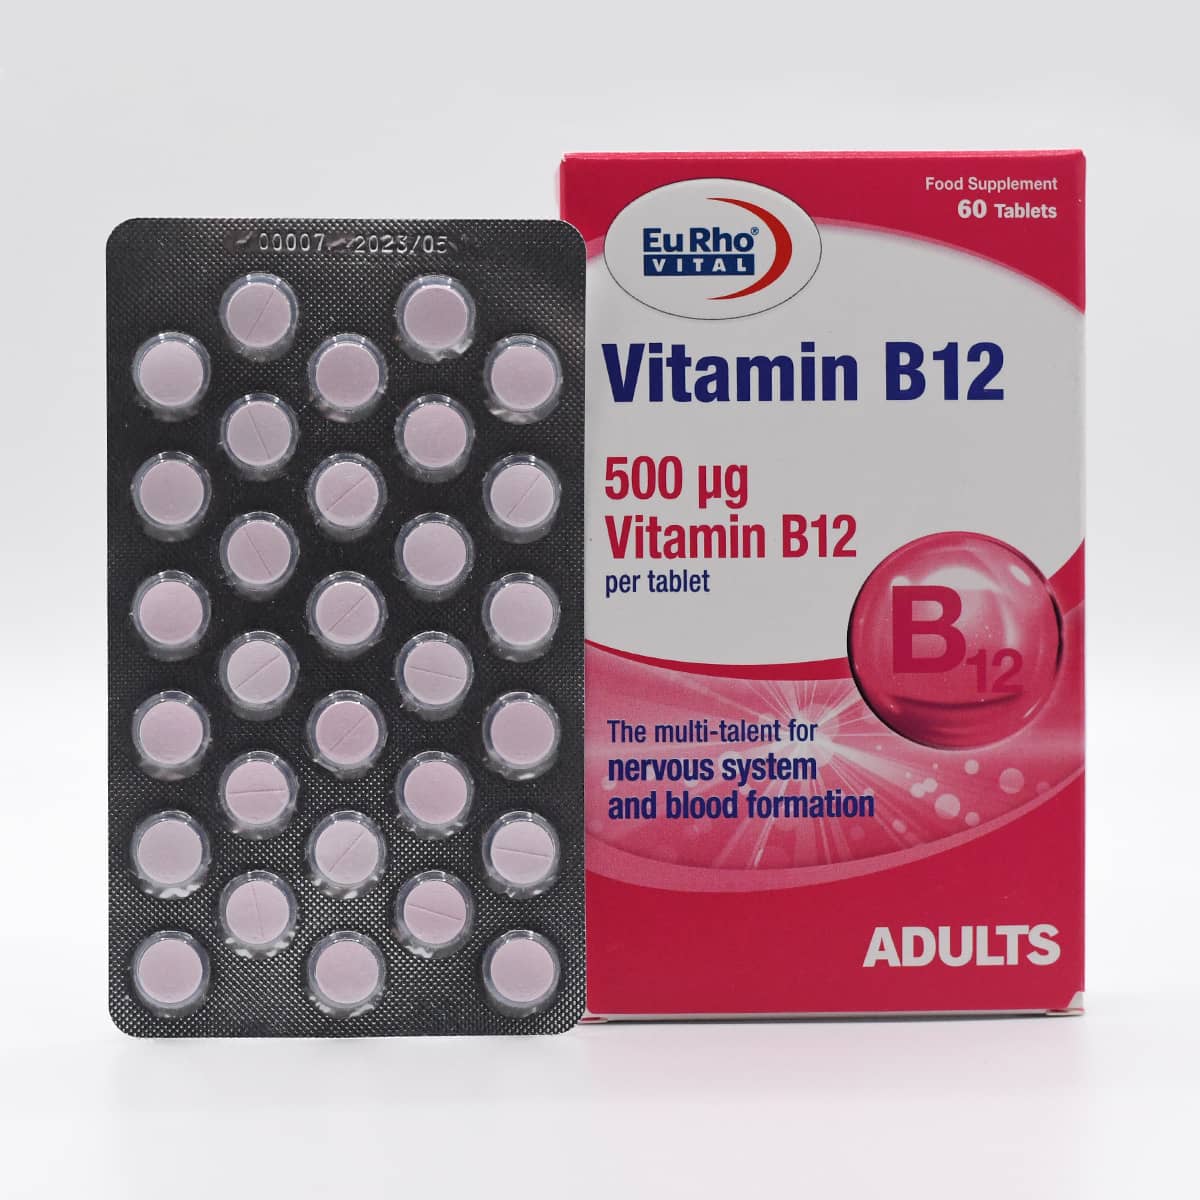 Familiarity with vitamin B12 tablets